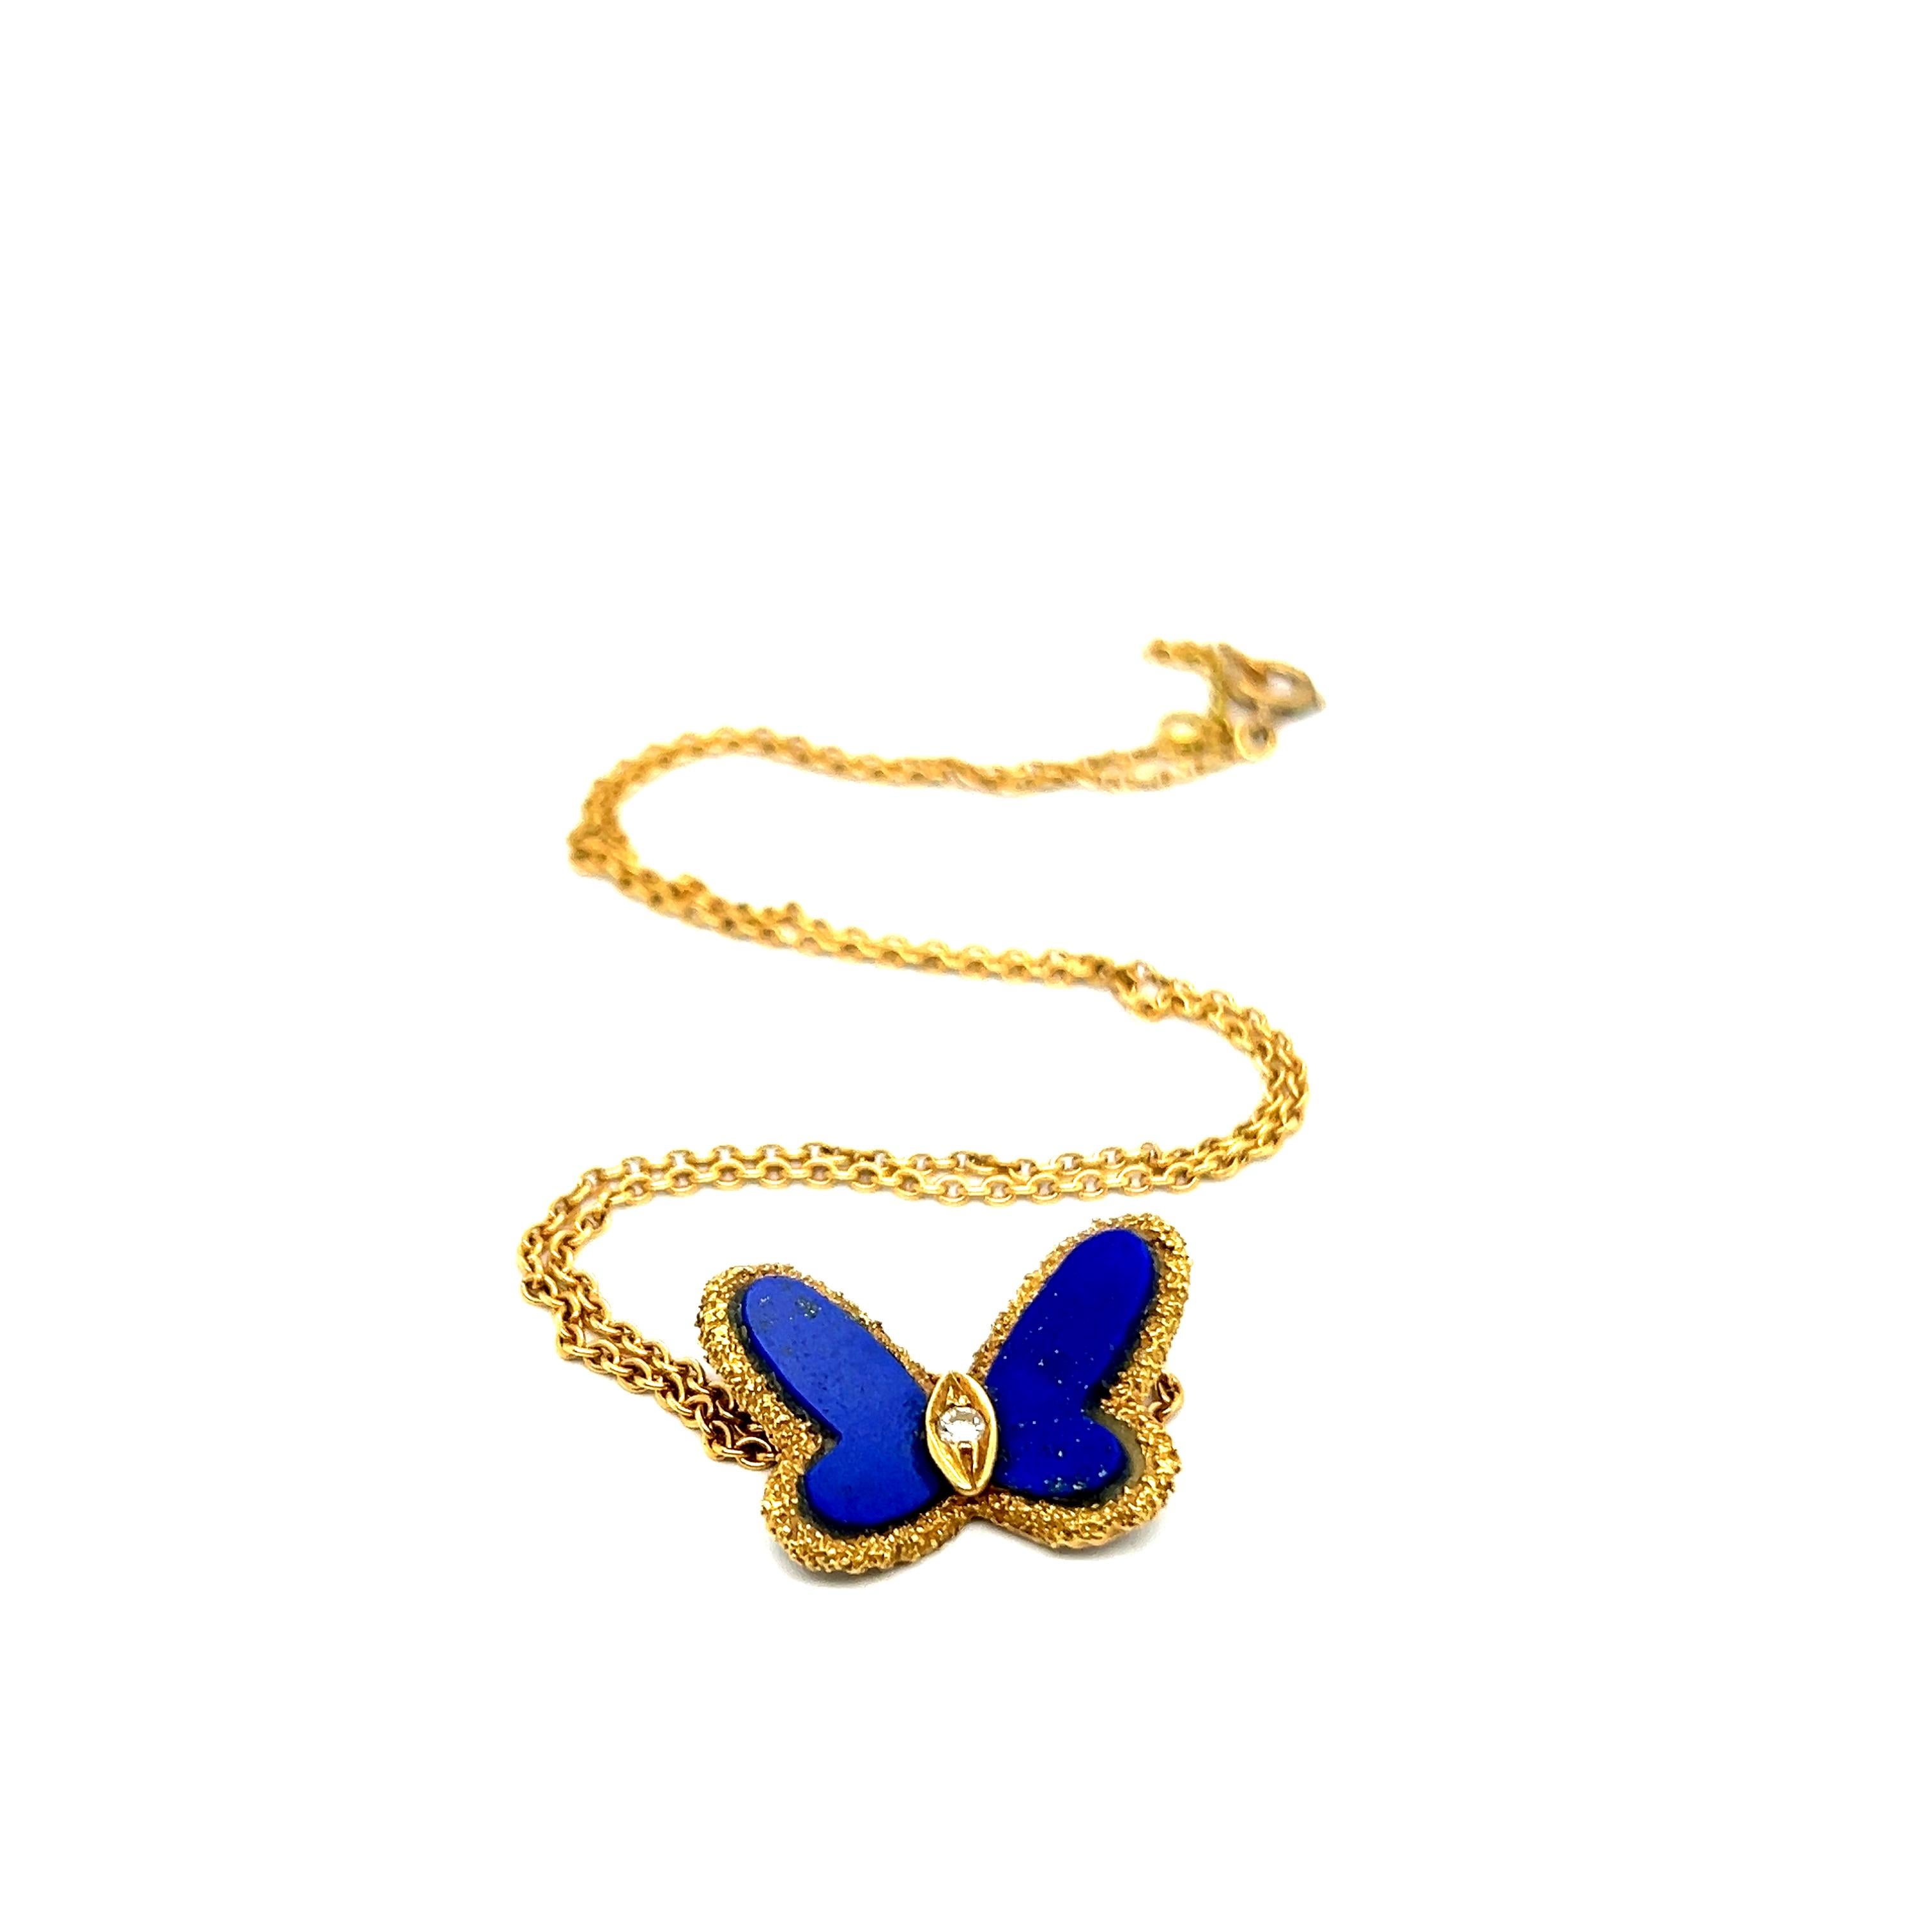 Unearth a masterpiece - Van Cleef & Arpels  Lapis Lazuli and Diamond Alhambra Butterfly Pendant Necklace. 

Crafted in 18-karat yellow gold, it boasts a captivating butterfly design adorned with radiant lapis lazuli. Combining Van Cleef & Arpels'